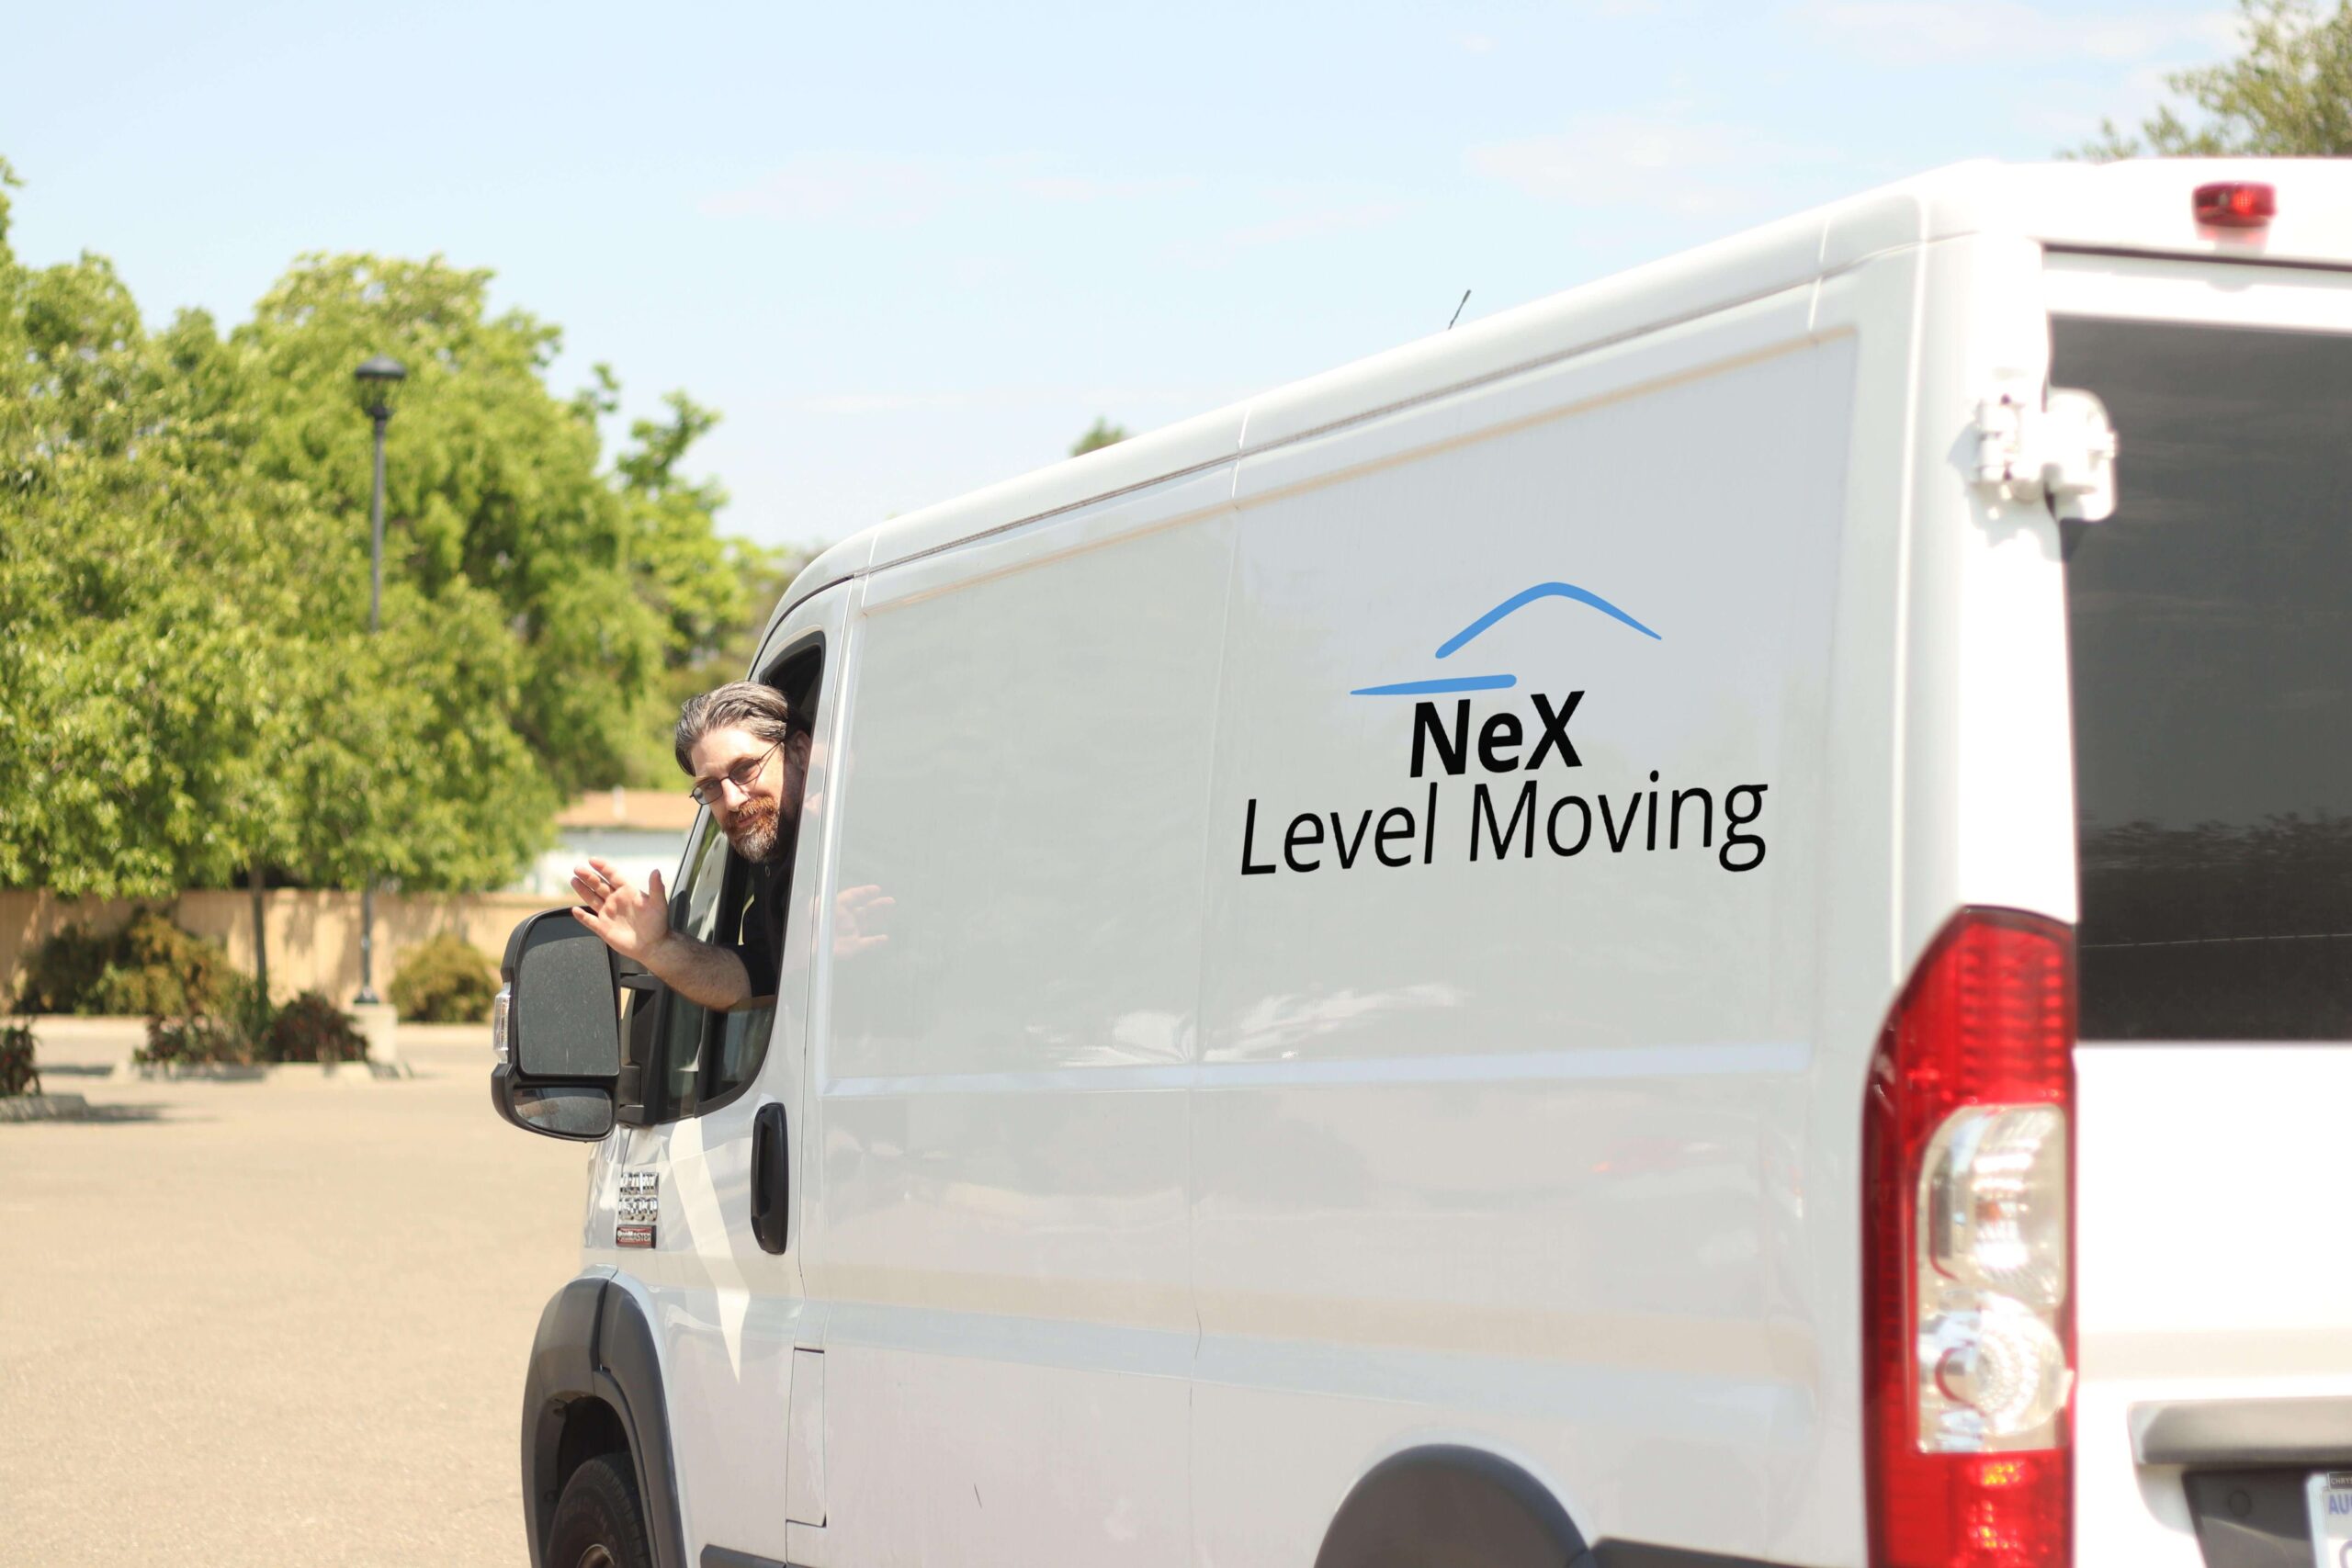 Hiring Movers? Read This First!